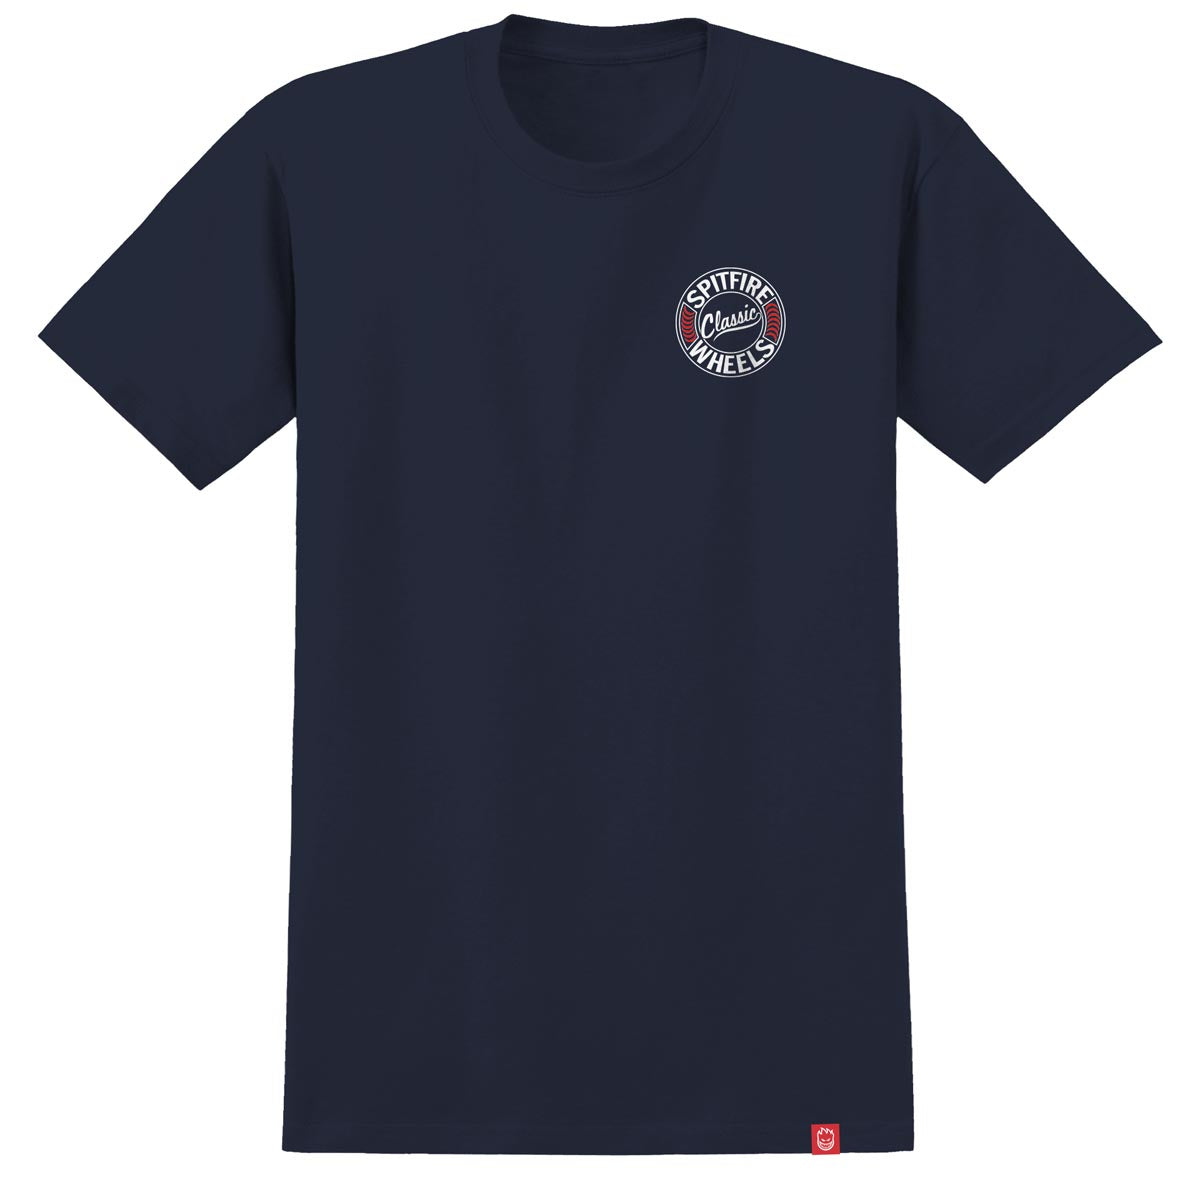 Spitfire Flying Classic T-Shirt - Navy/White/Red image 2